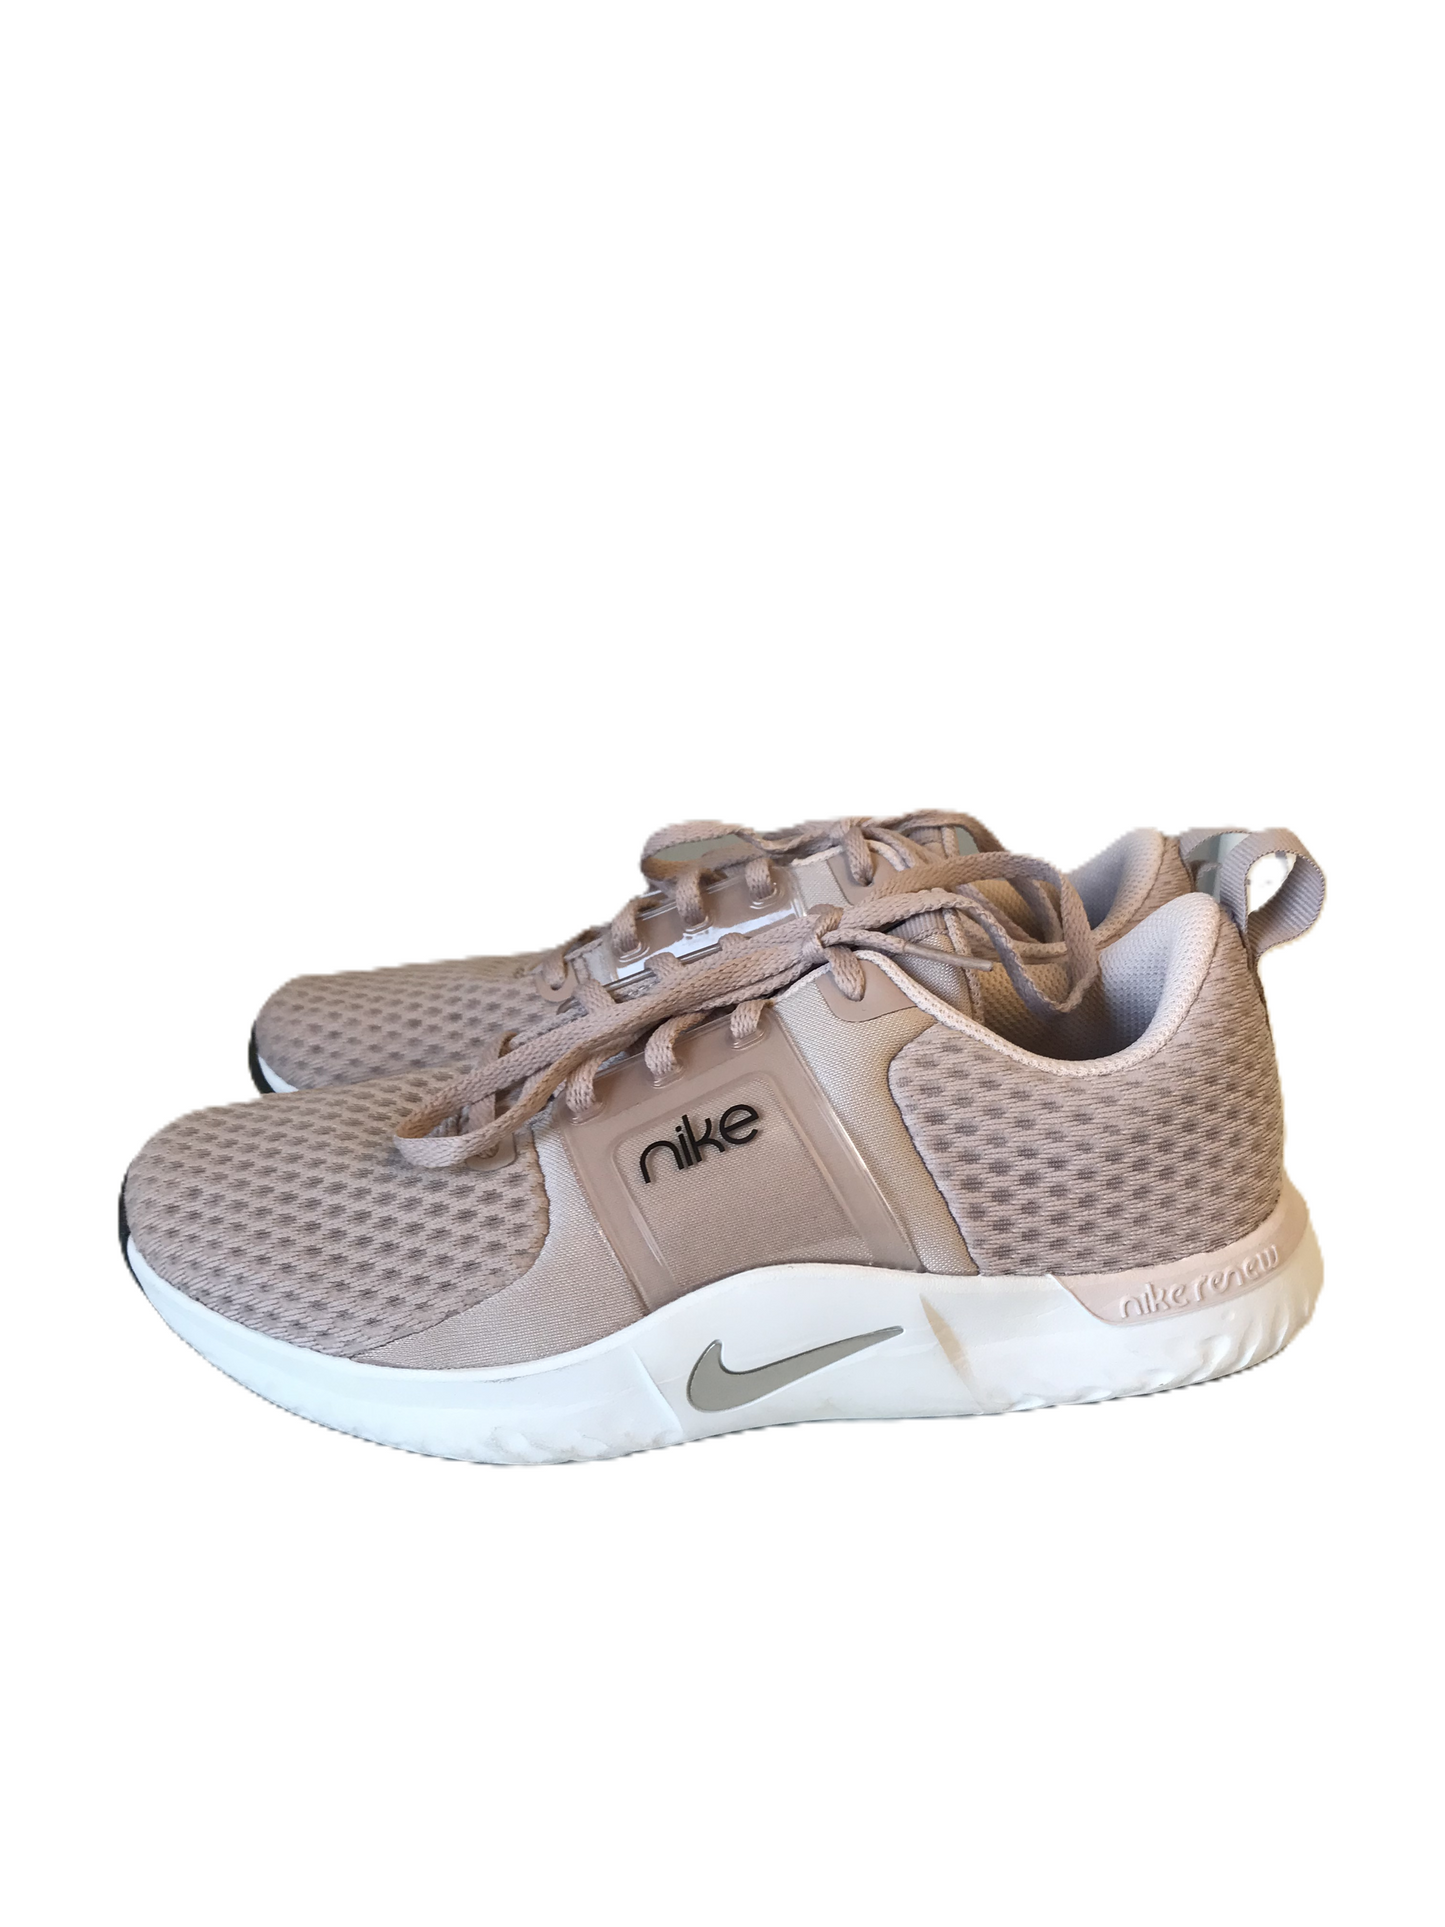 Tan & White Shoes Athletic By Nike, Size: 9